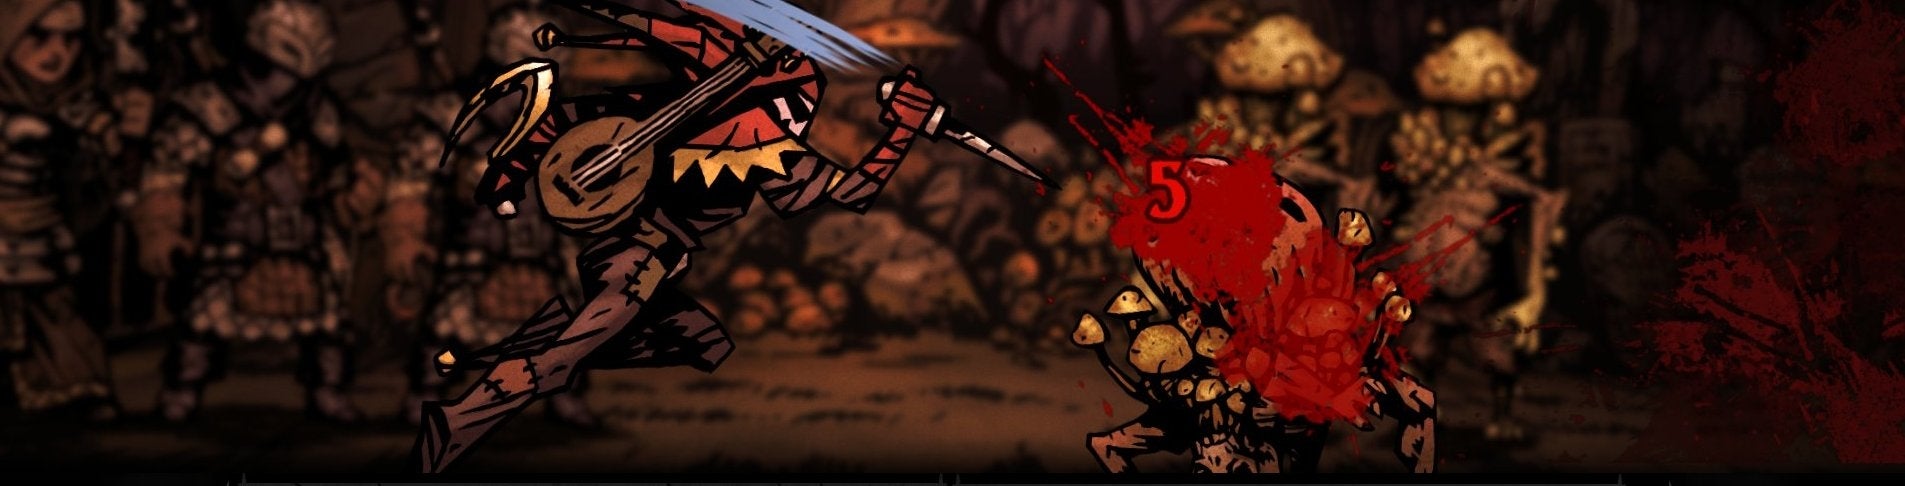 Image for Darkest Dungeon might not be fun, but it is fascinating